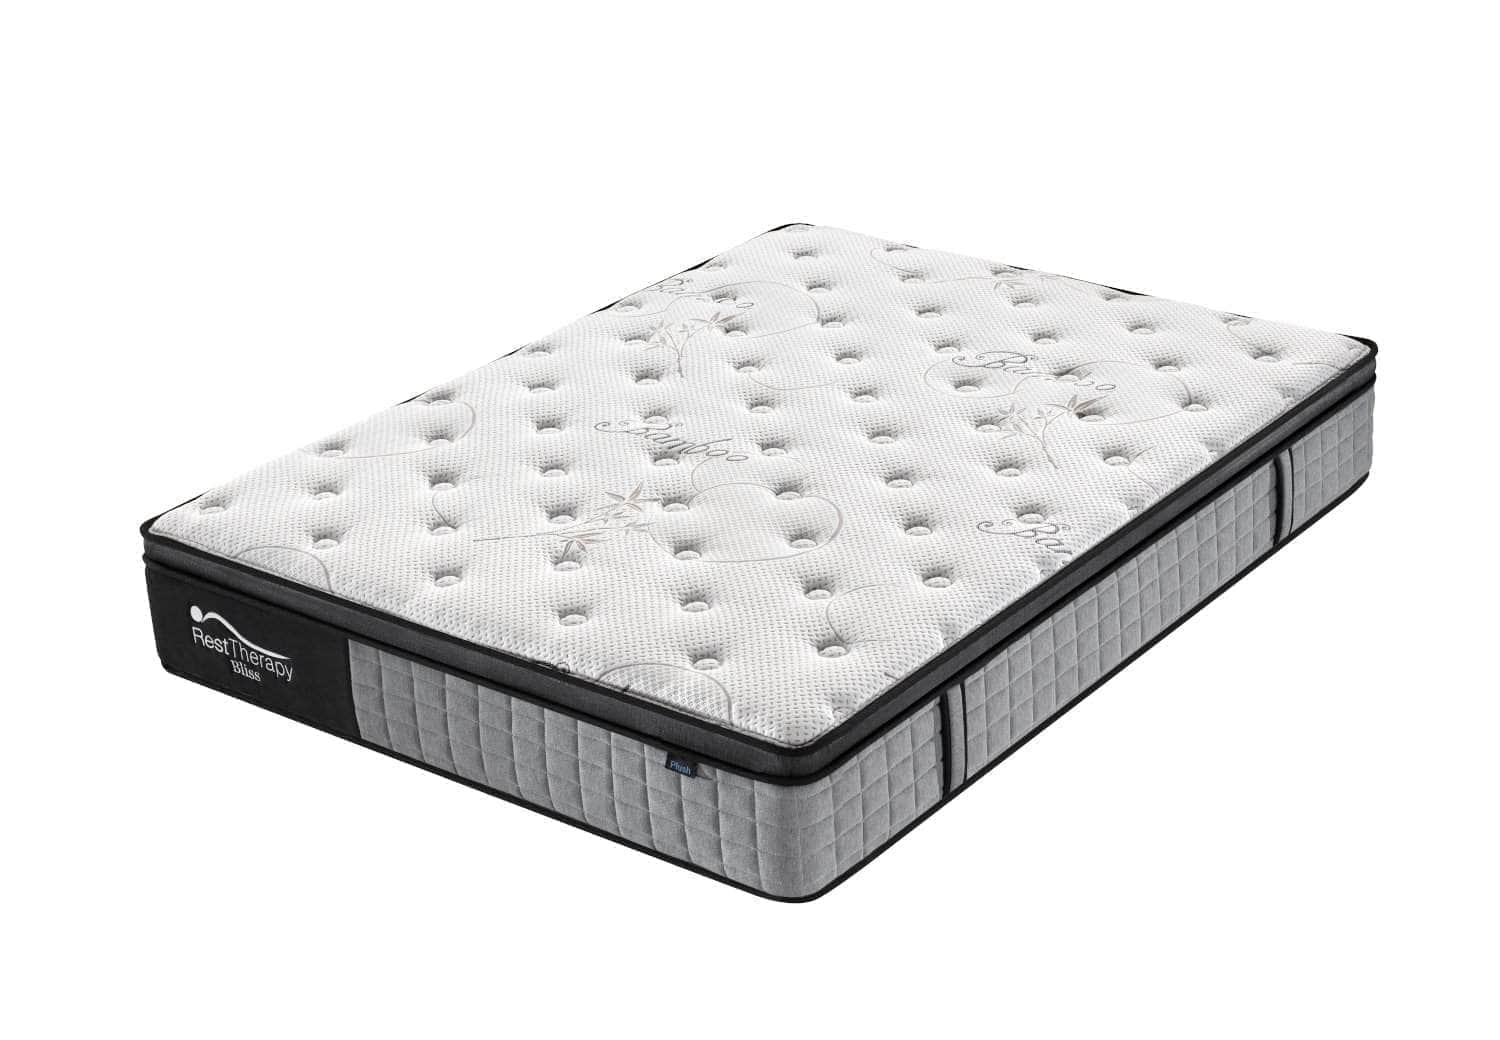 WOW Beds Duo Mattress Review: Comfortable & Cool